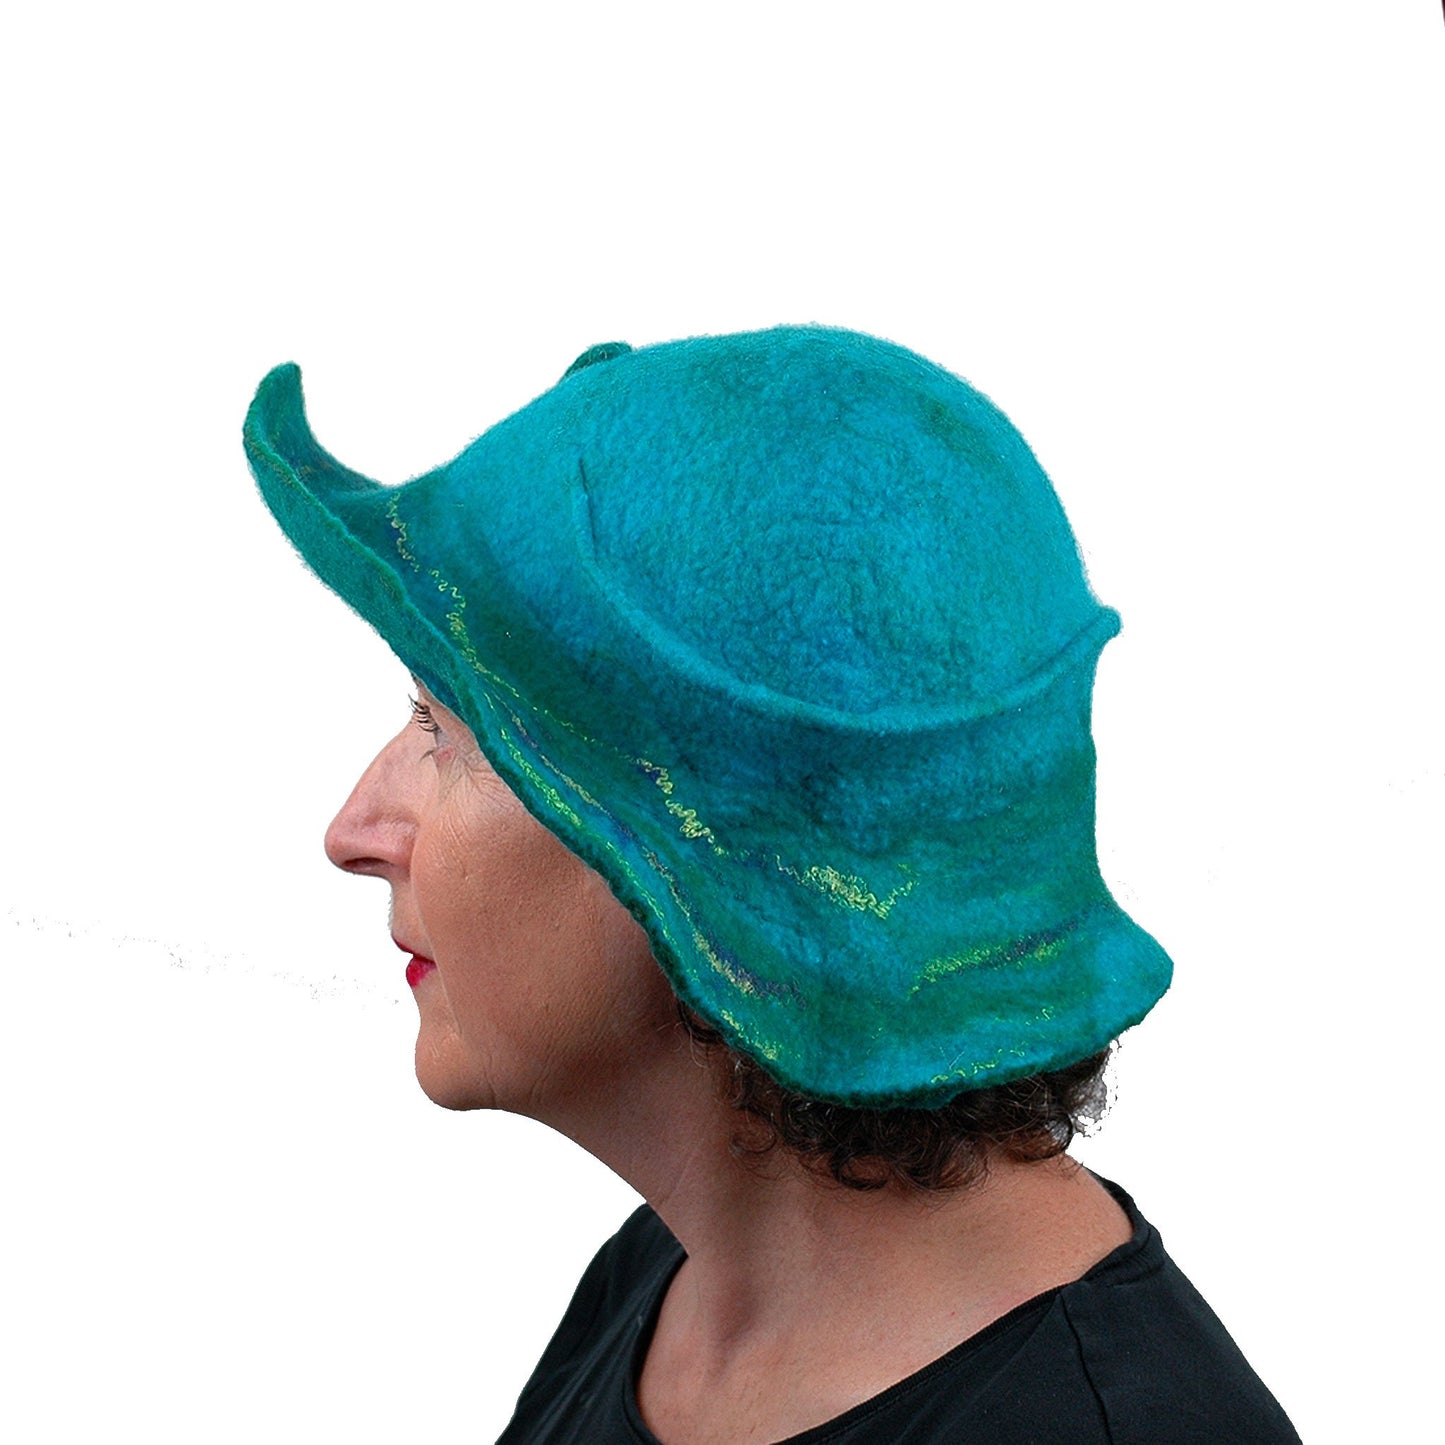 Peacock Inspired Fedora in Turquoise Blue - side view